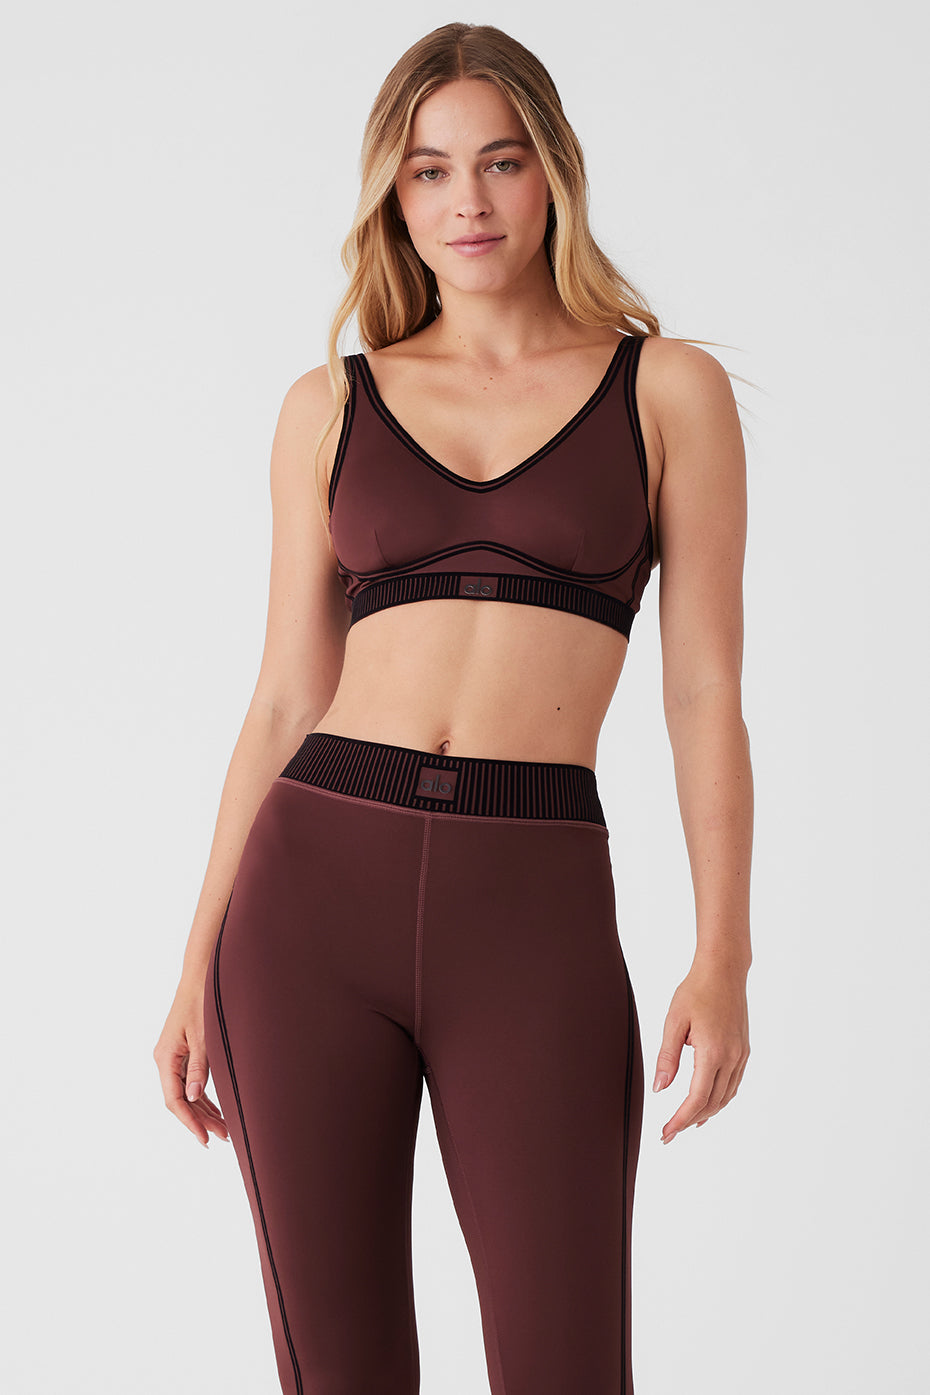 Airlift Intrigue Bra in Magenta Crush by Alo Yoga - Work Well Daily